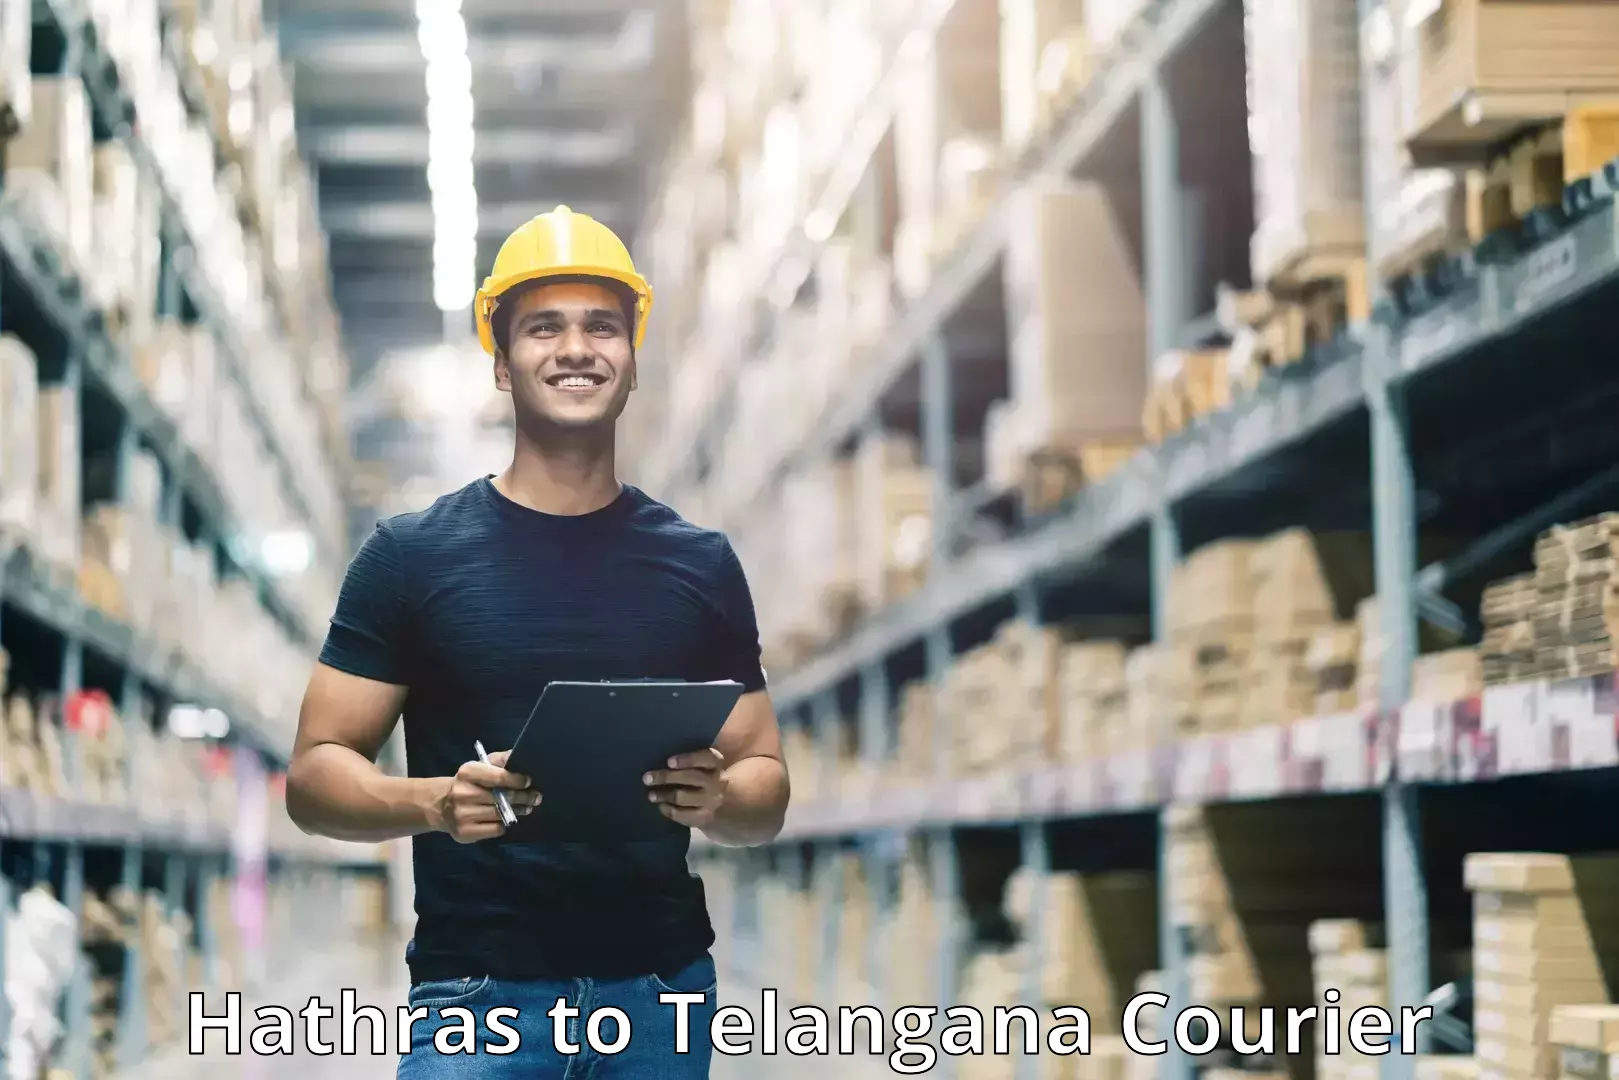 Customer-focused courier Hathras to Alair